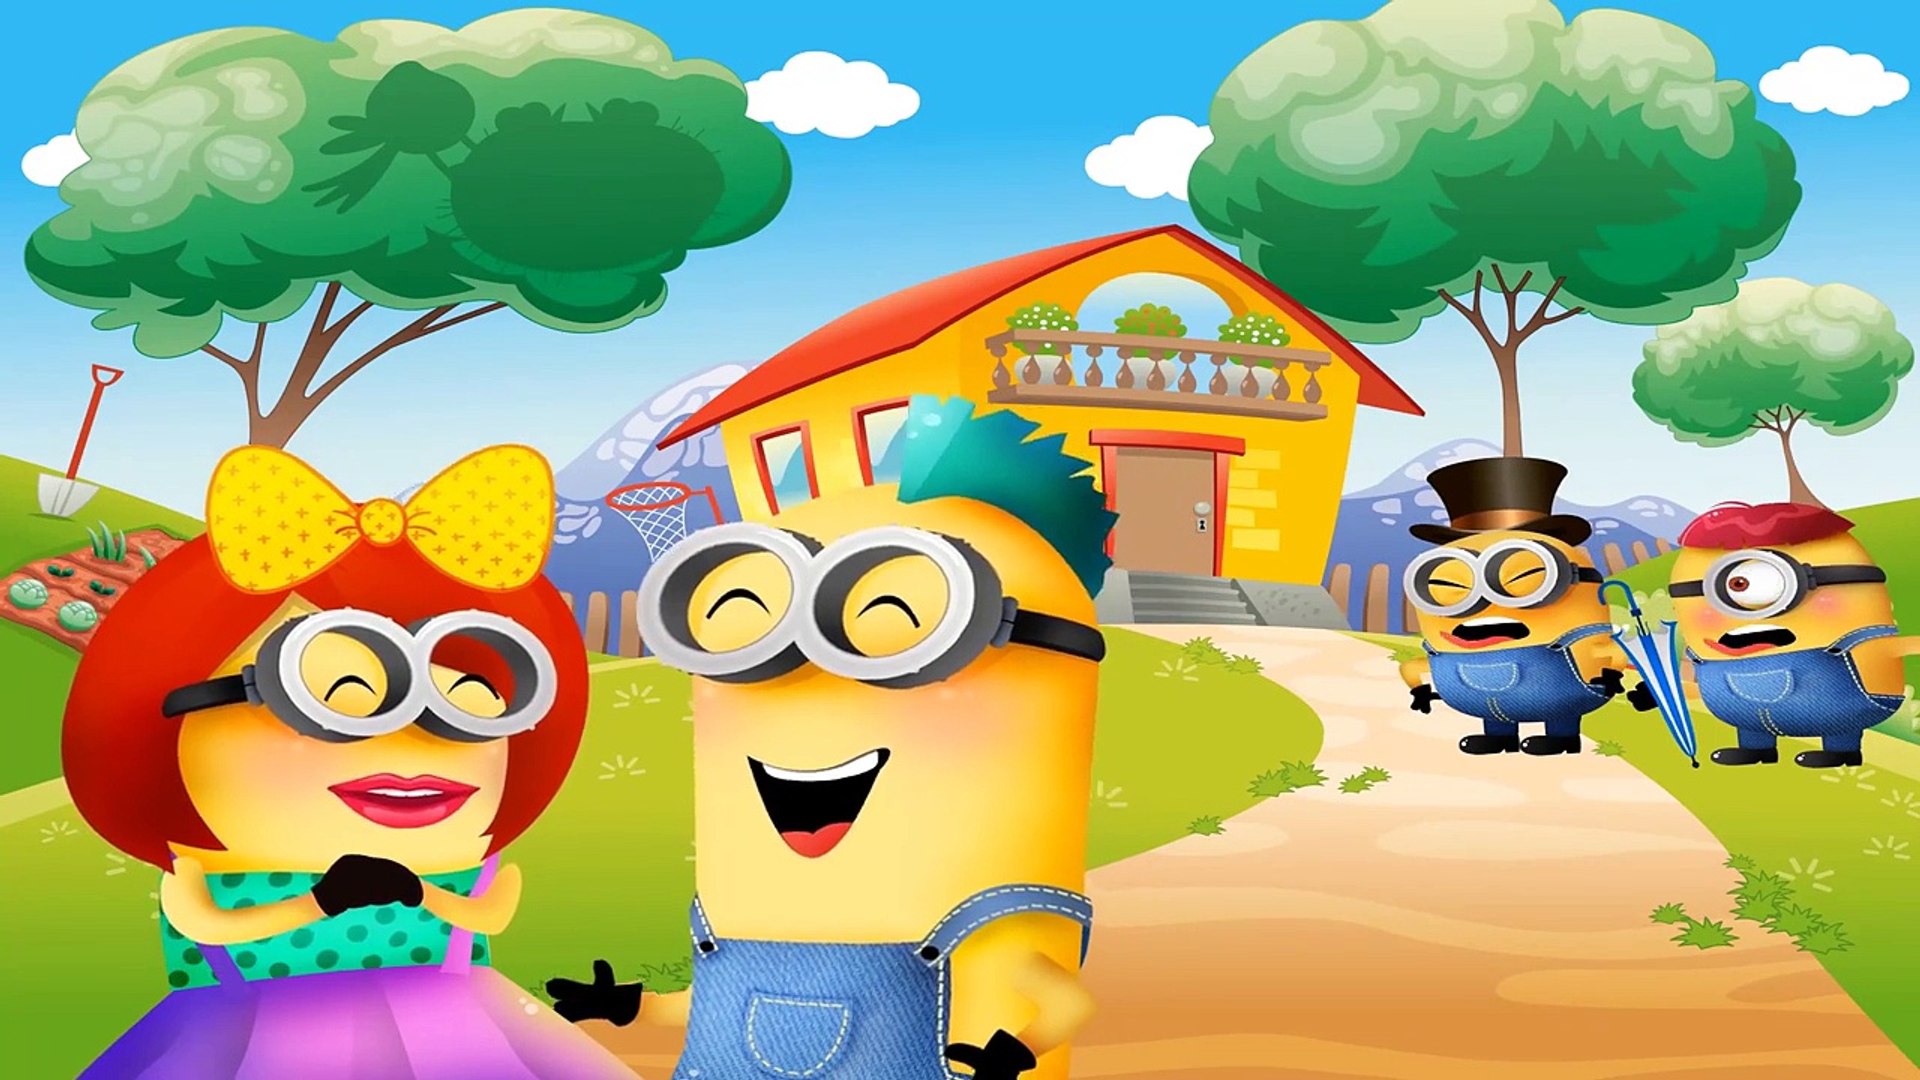 Minions Songs and Rhymes: Exploring Musical Linguistics